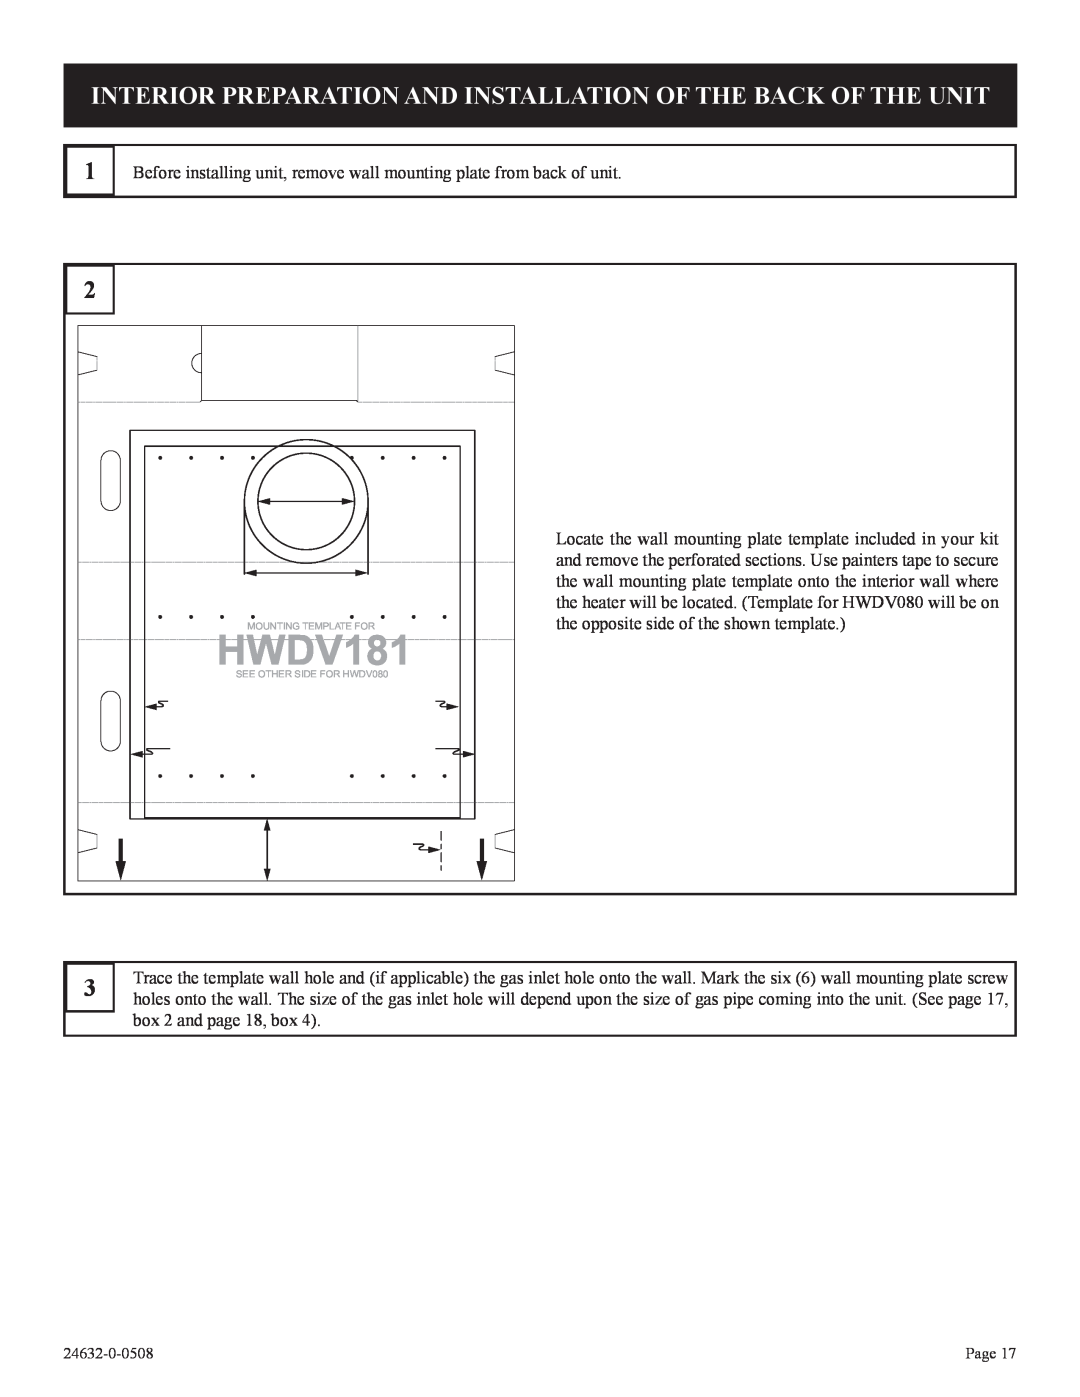 Epson P)-1, HWDV080DV(N installation instructions Mounting Template For, SEE OTHER SIDE FOR HWDV080 